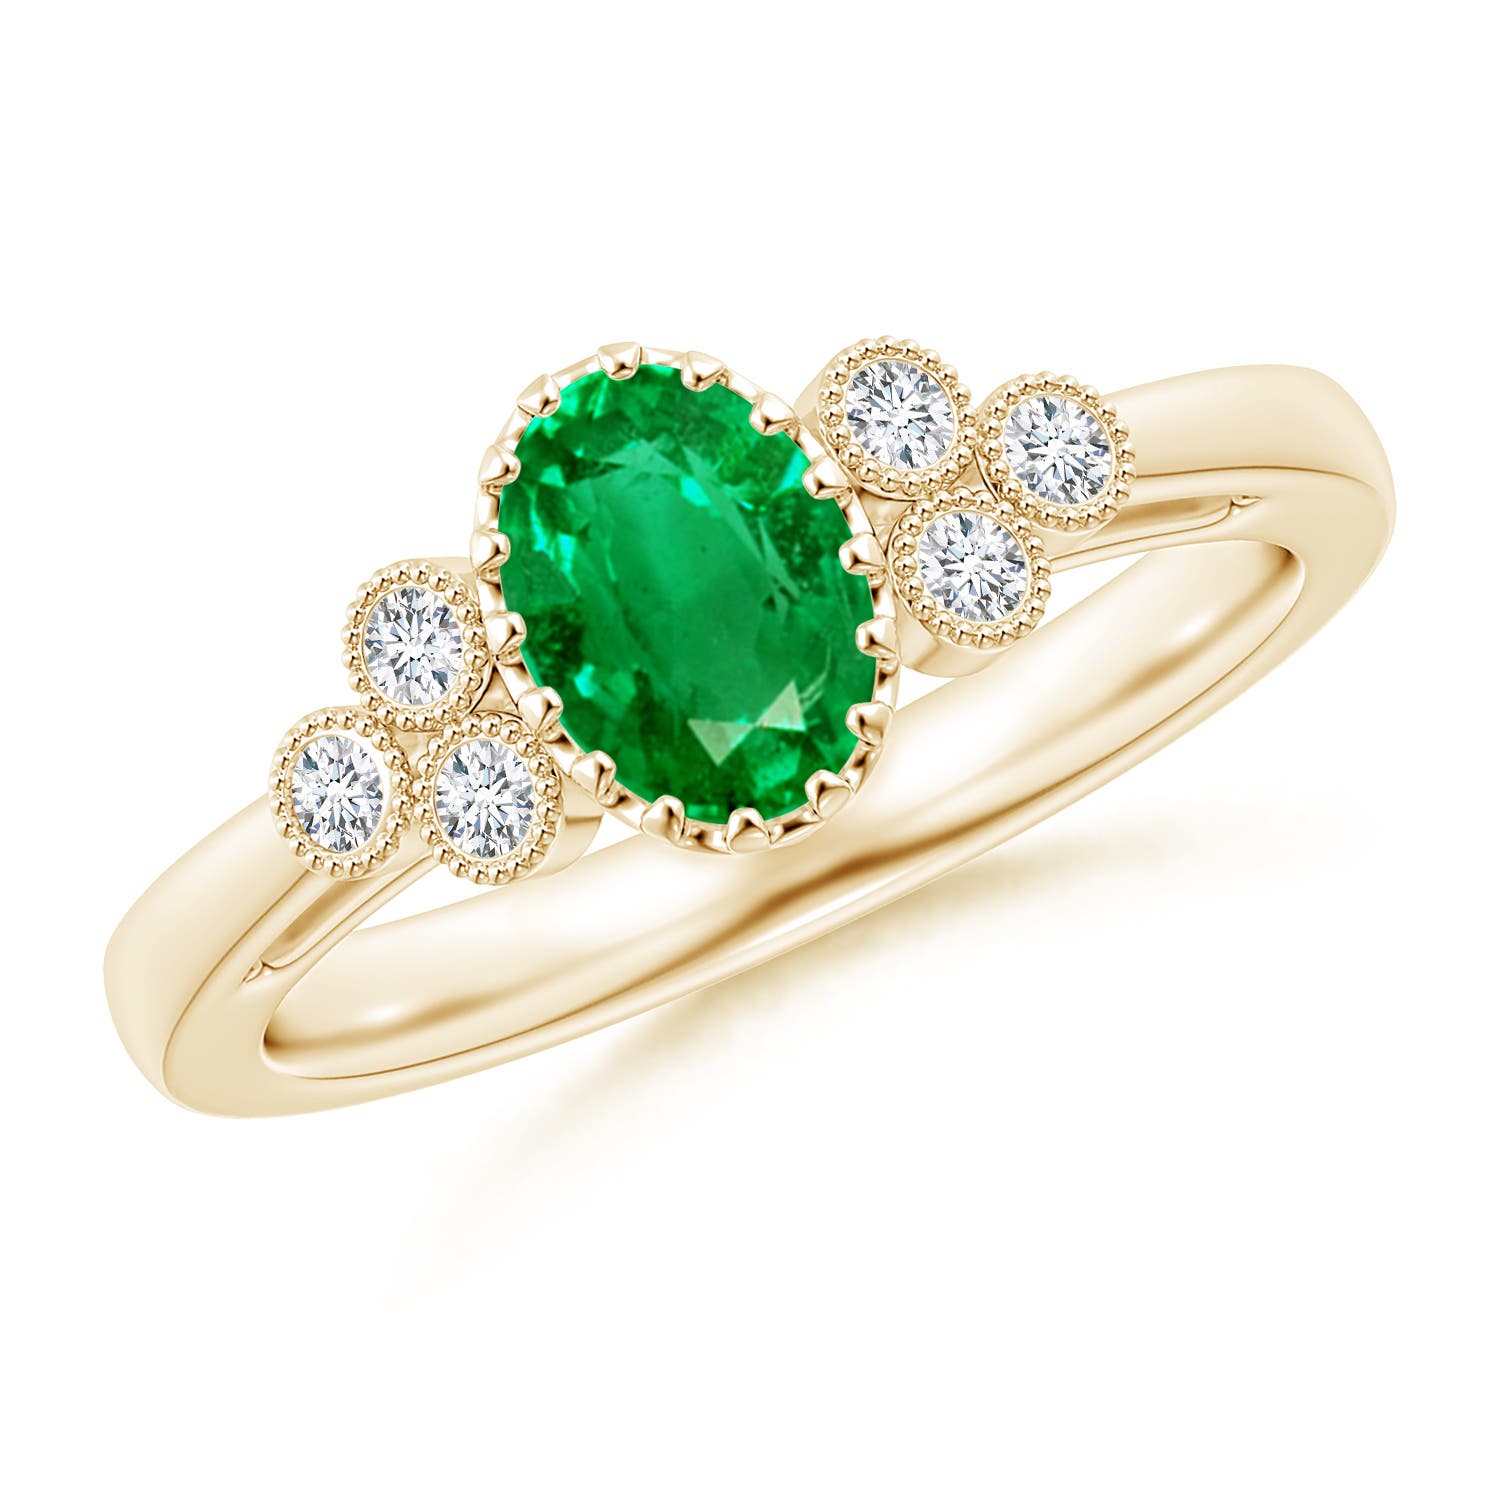 AAA - Emerald / 0.8 CT / 14 KT Yellow Gold